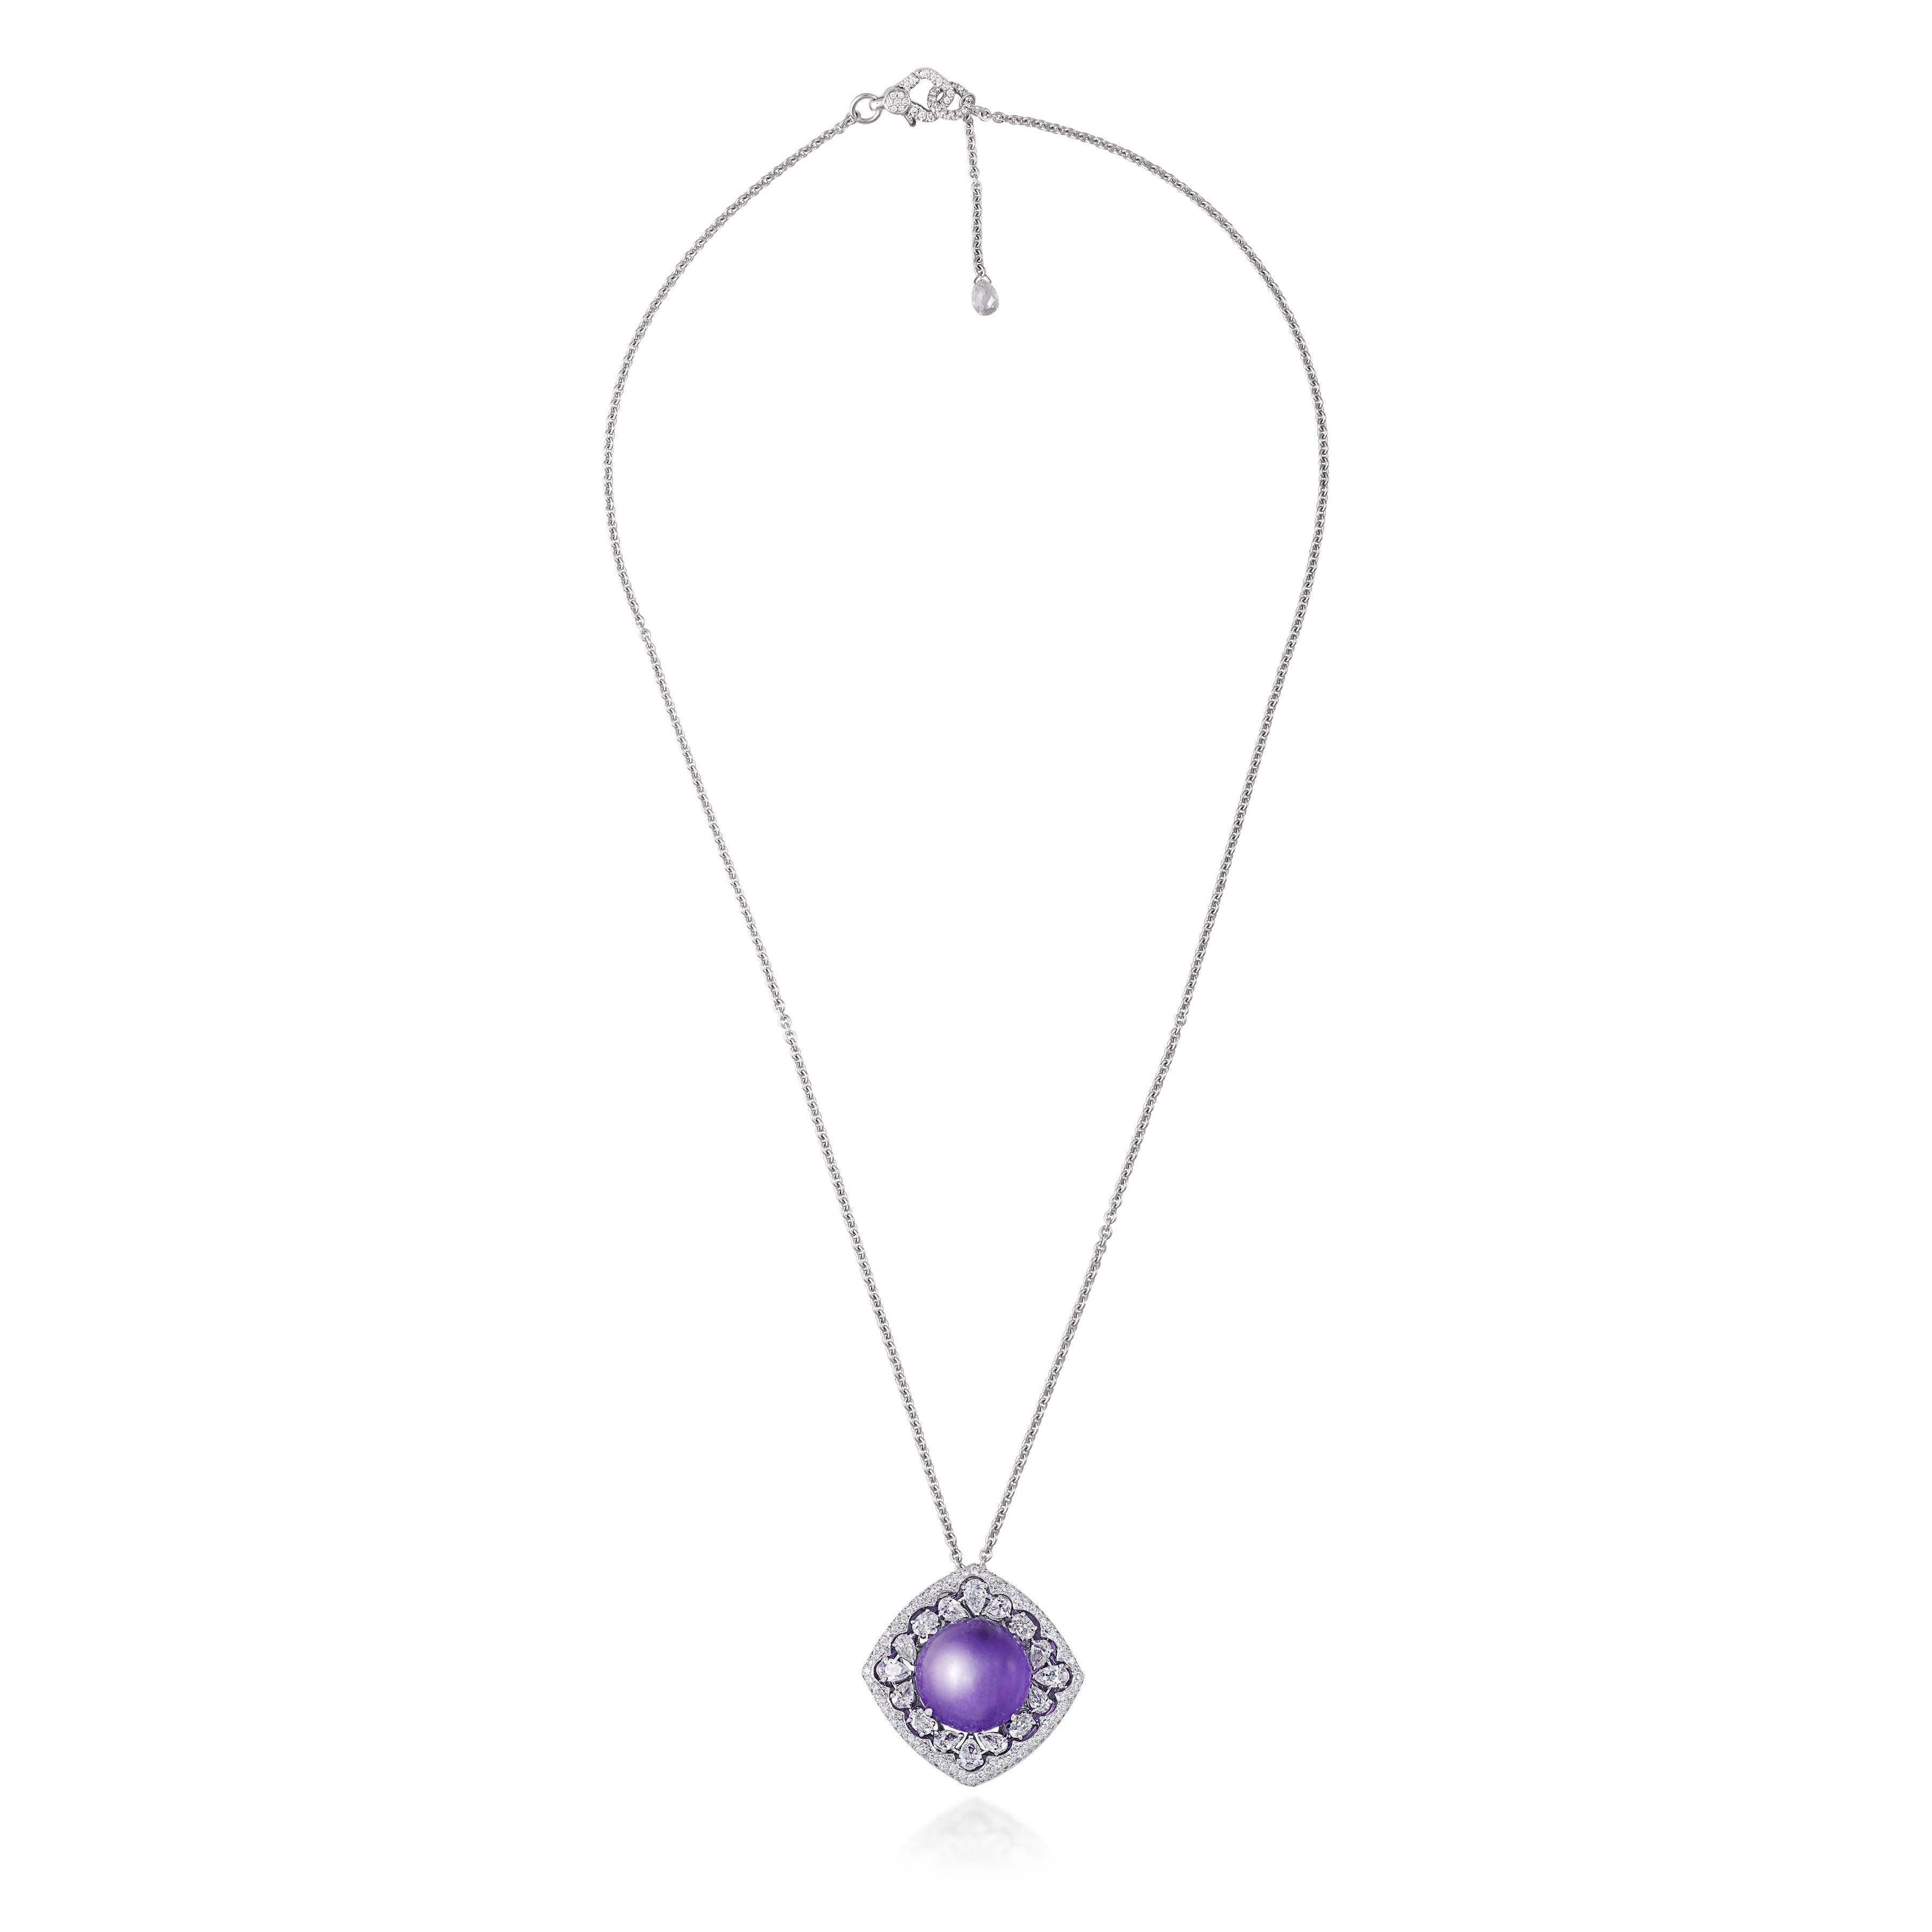 The Amethyst Eye is ensemble of different types of diamonds from Rarever. The pendant has a purplish hued amethyst cabochon weighing 14.12 carats, which is surrounded by pear shaped Rose cut Diamonds  set in a way making a geometric form. The round